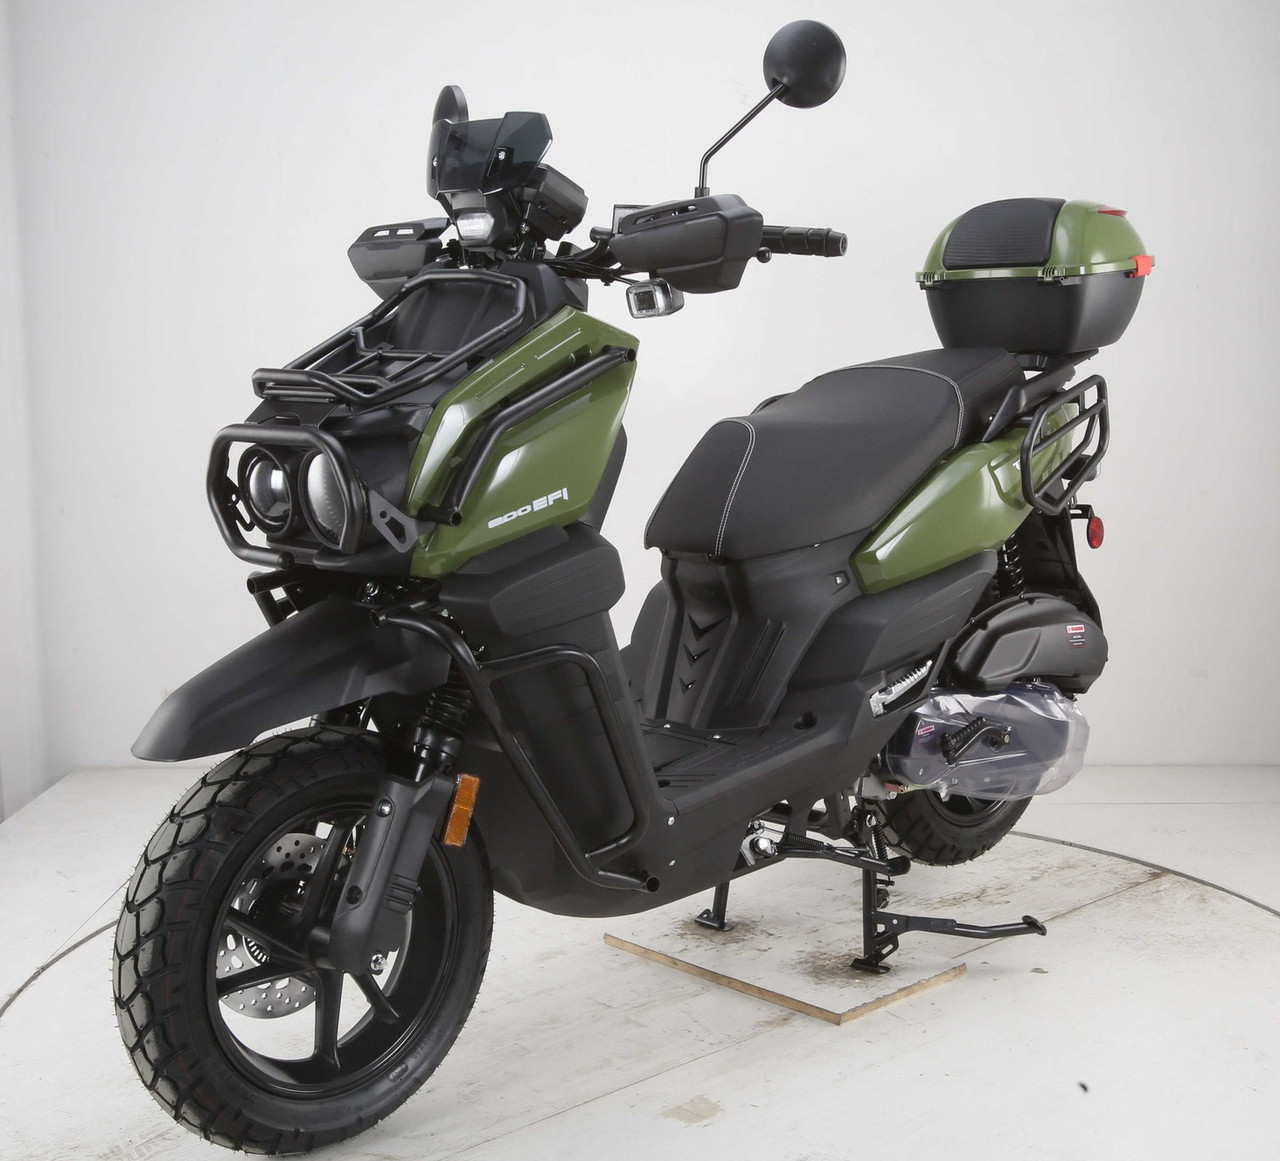 Vitacci Tank 200 EFI Scooter, (GY6) 4-Stroke, Air cooled, Alloy RIM - Fully Assembled and Tested